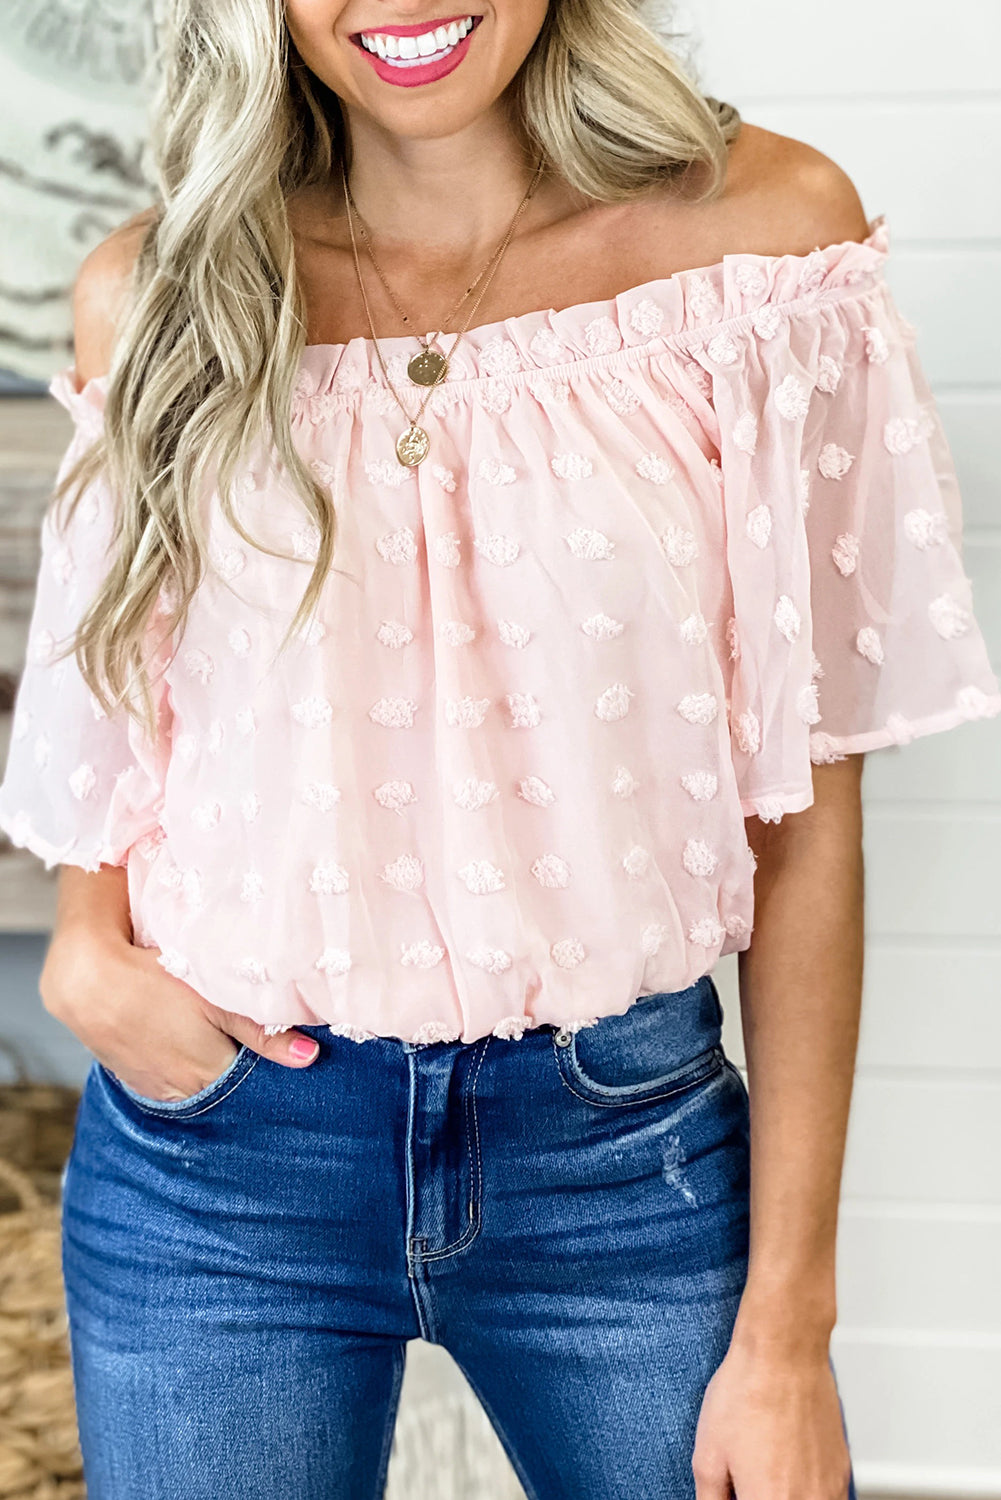 Blouse Dentelle Rose Chic A Pois Epaules Denudees Manches Courtes